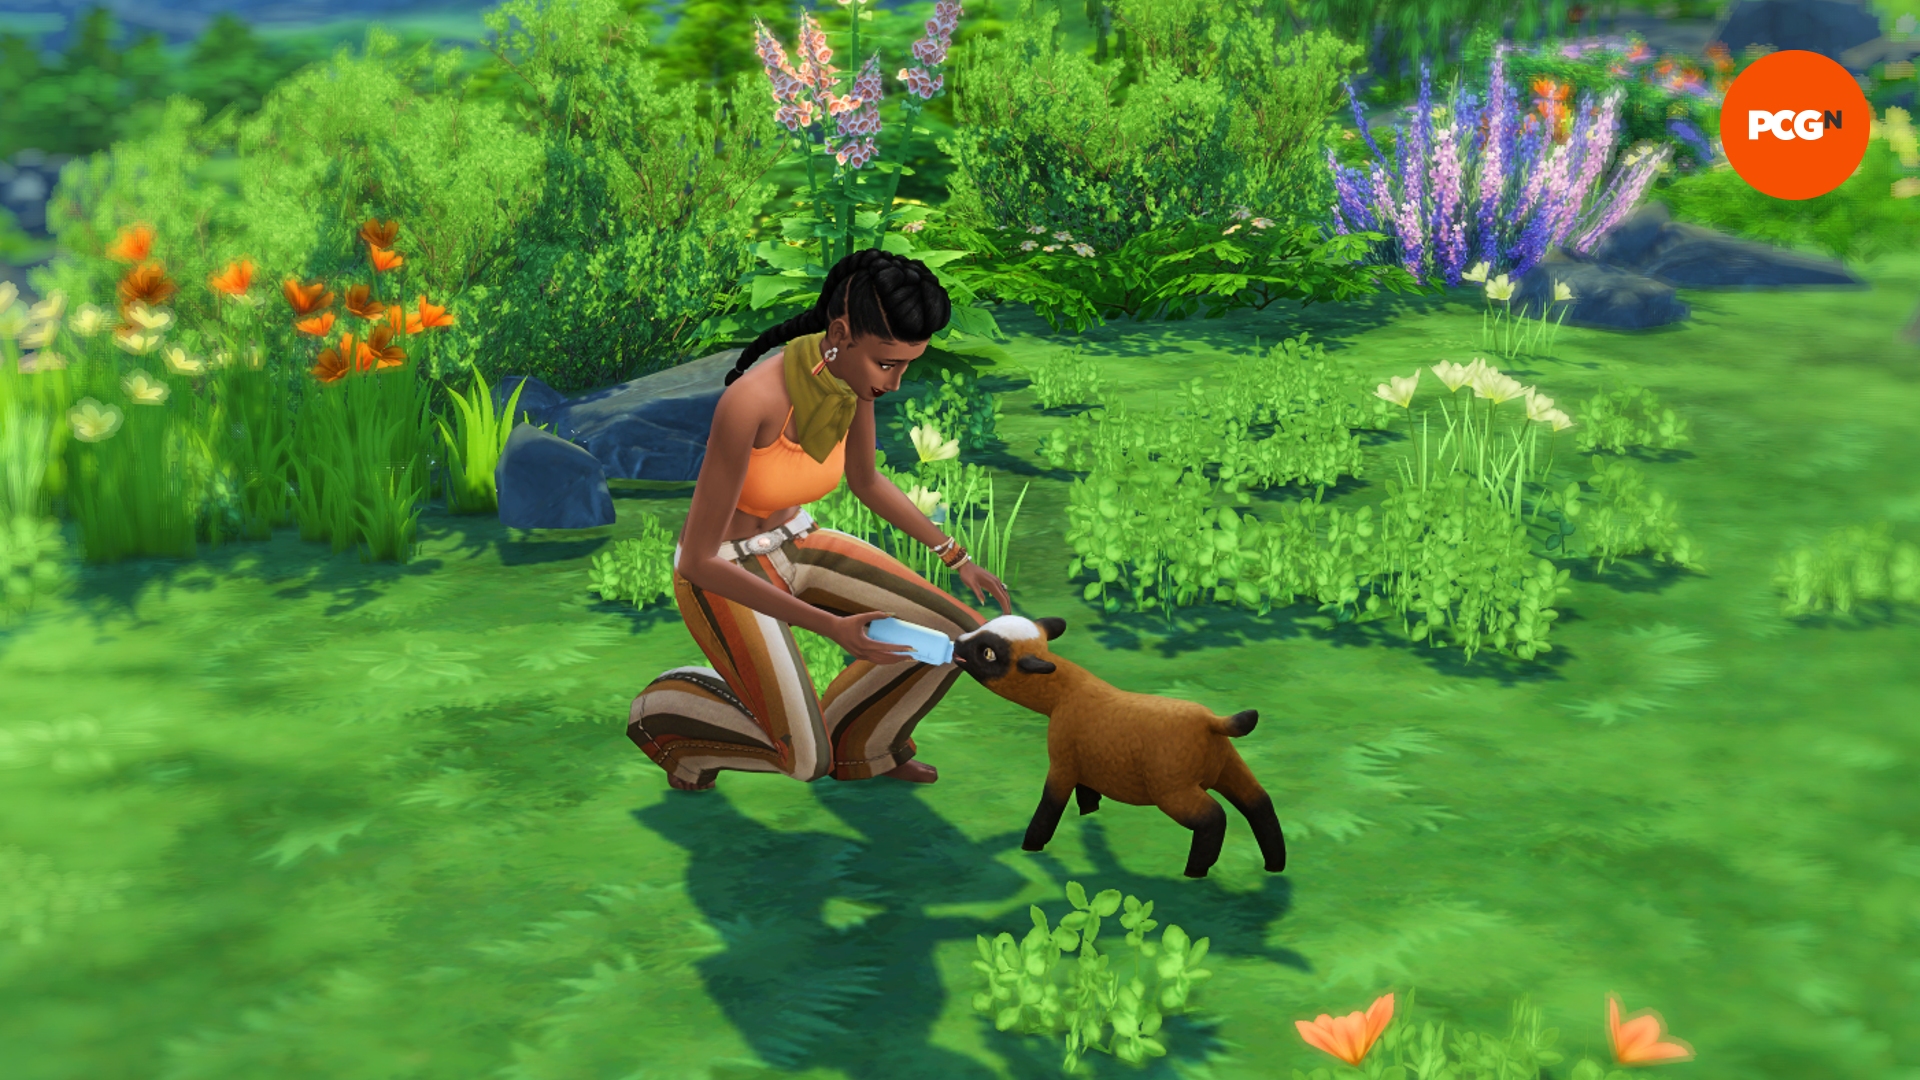 A female Sim wearing an orange-capped bottle feeds a baby goat in a grassy field with flowers